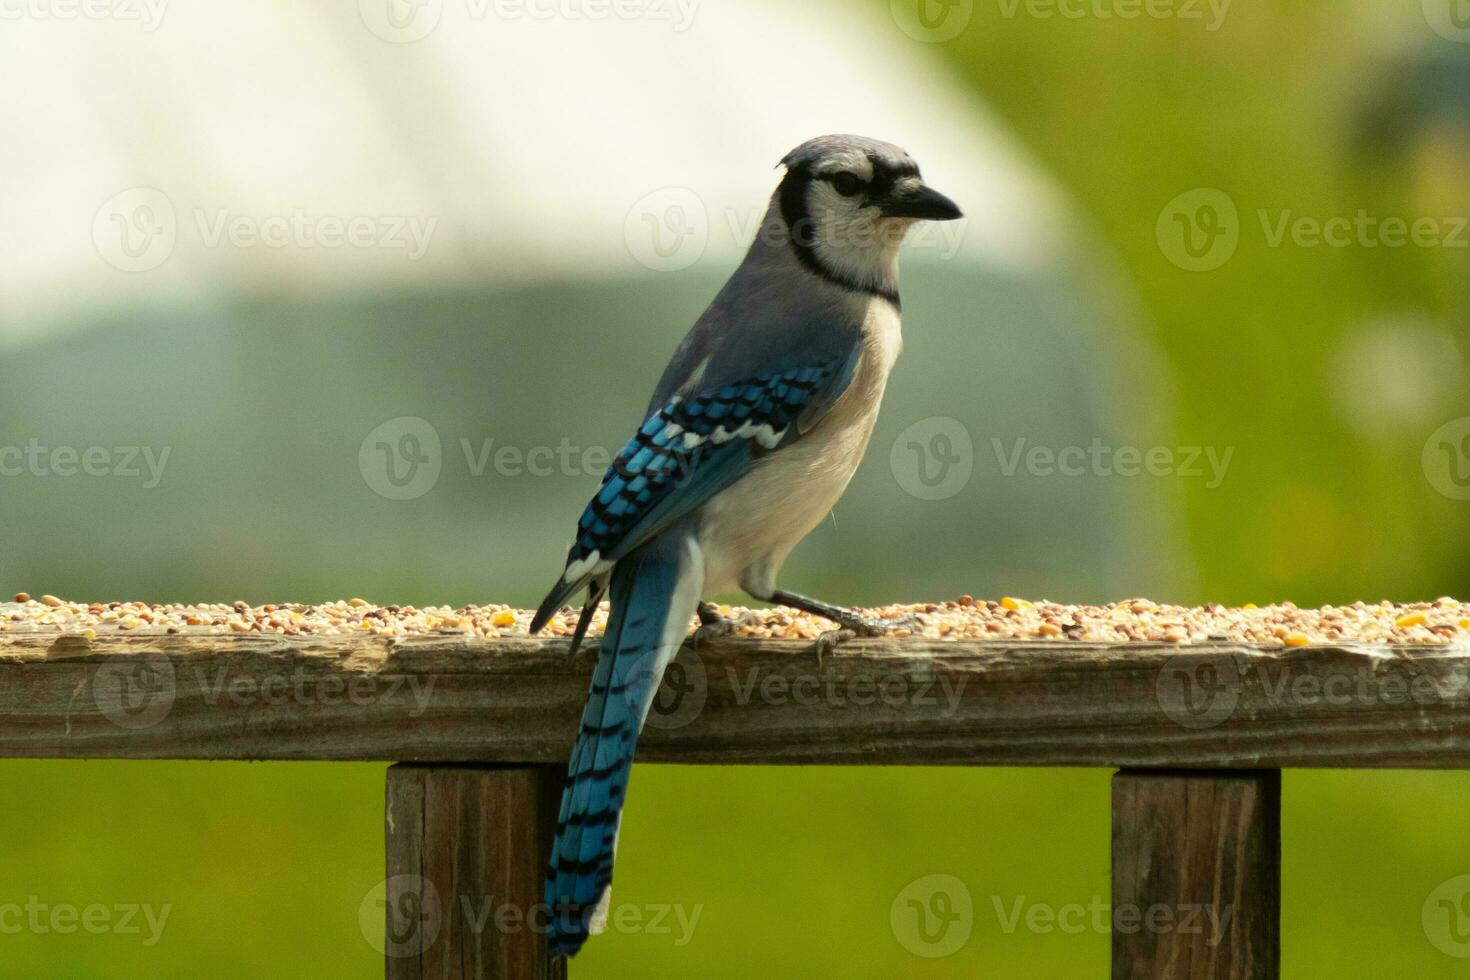 This blue jay bird was striking a pose as I took this picture. He came out on the wooden railing of the deck for some birdseed. I love the colors of these birds with the blue, black, and white. photo